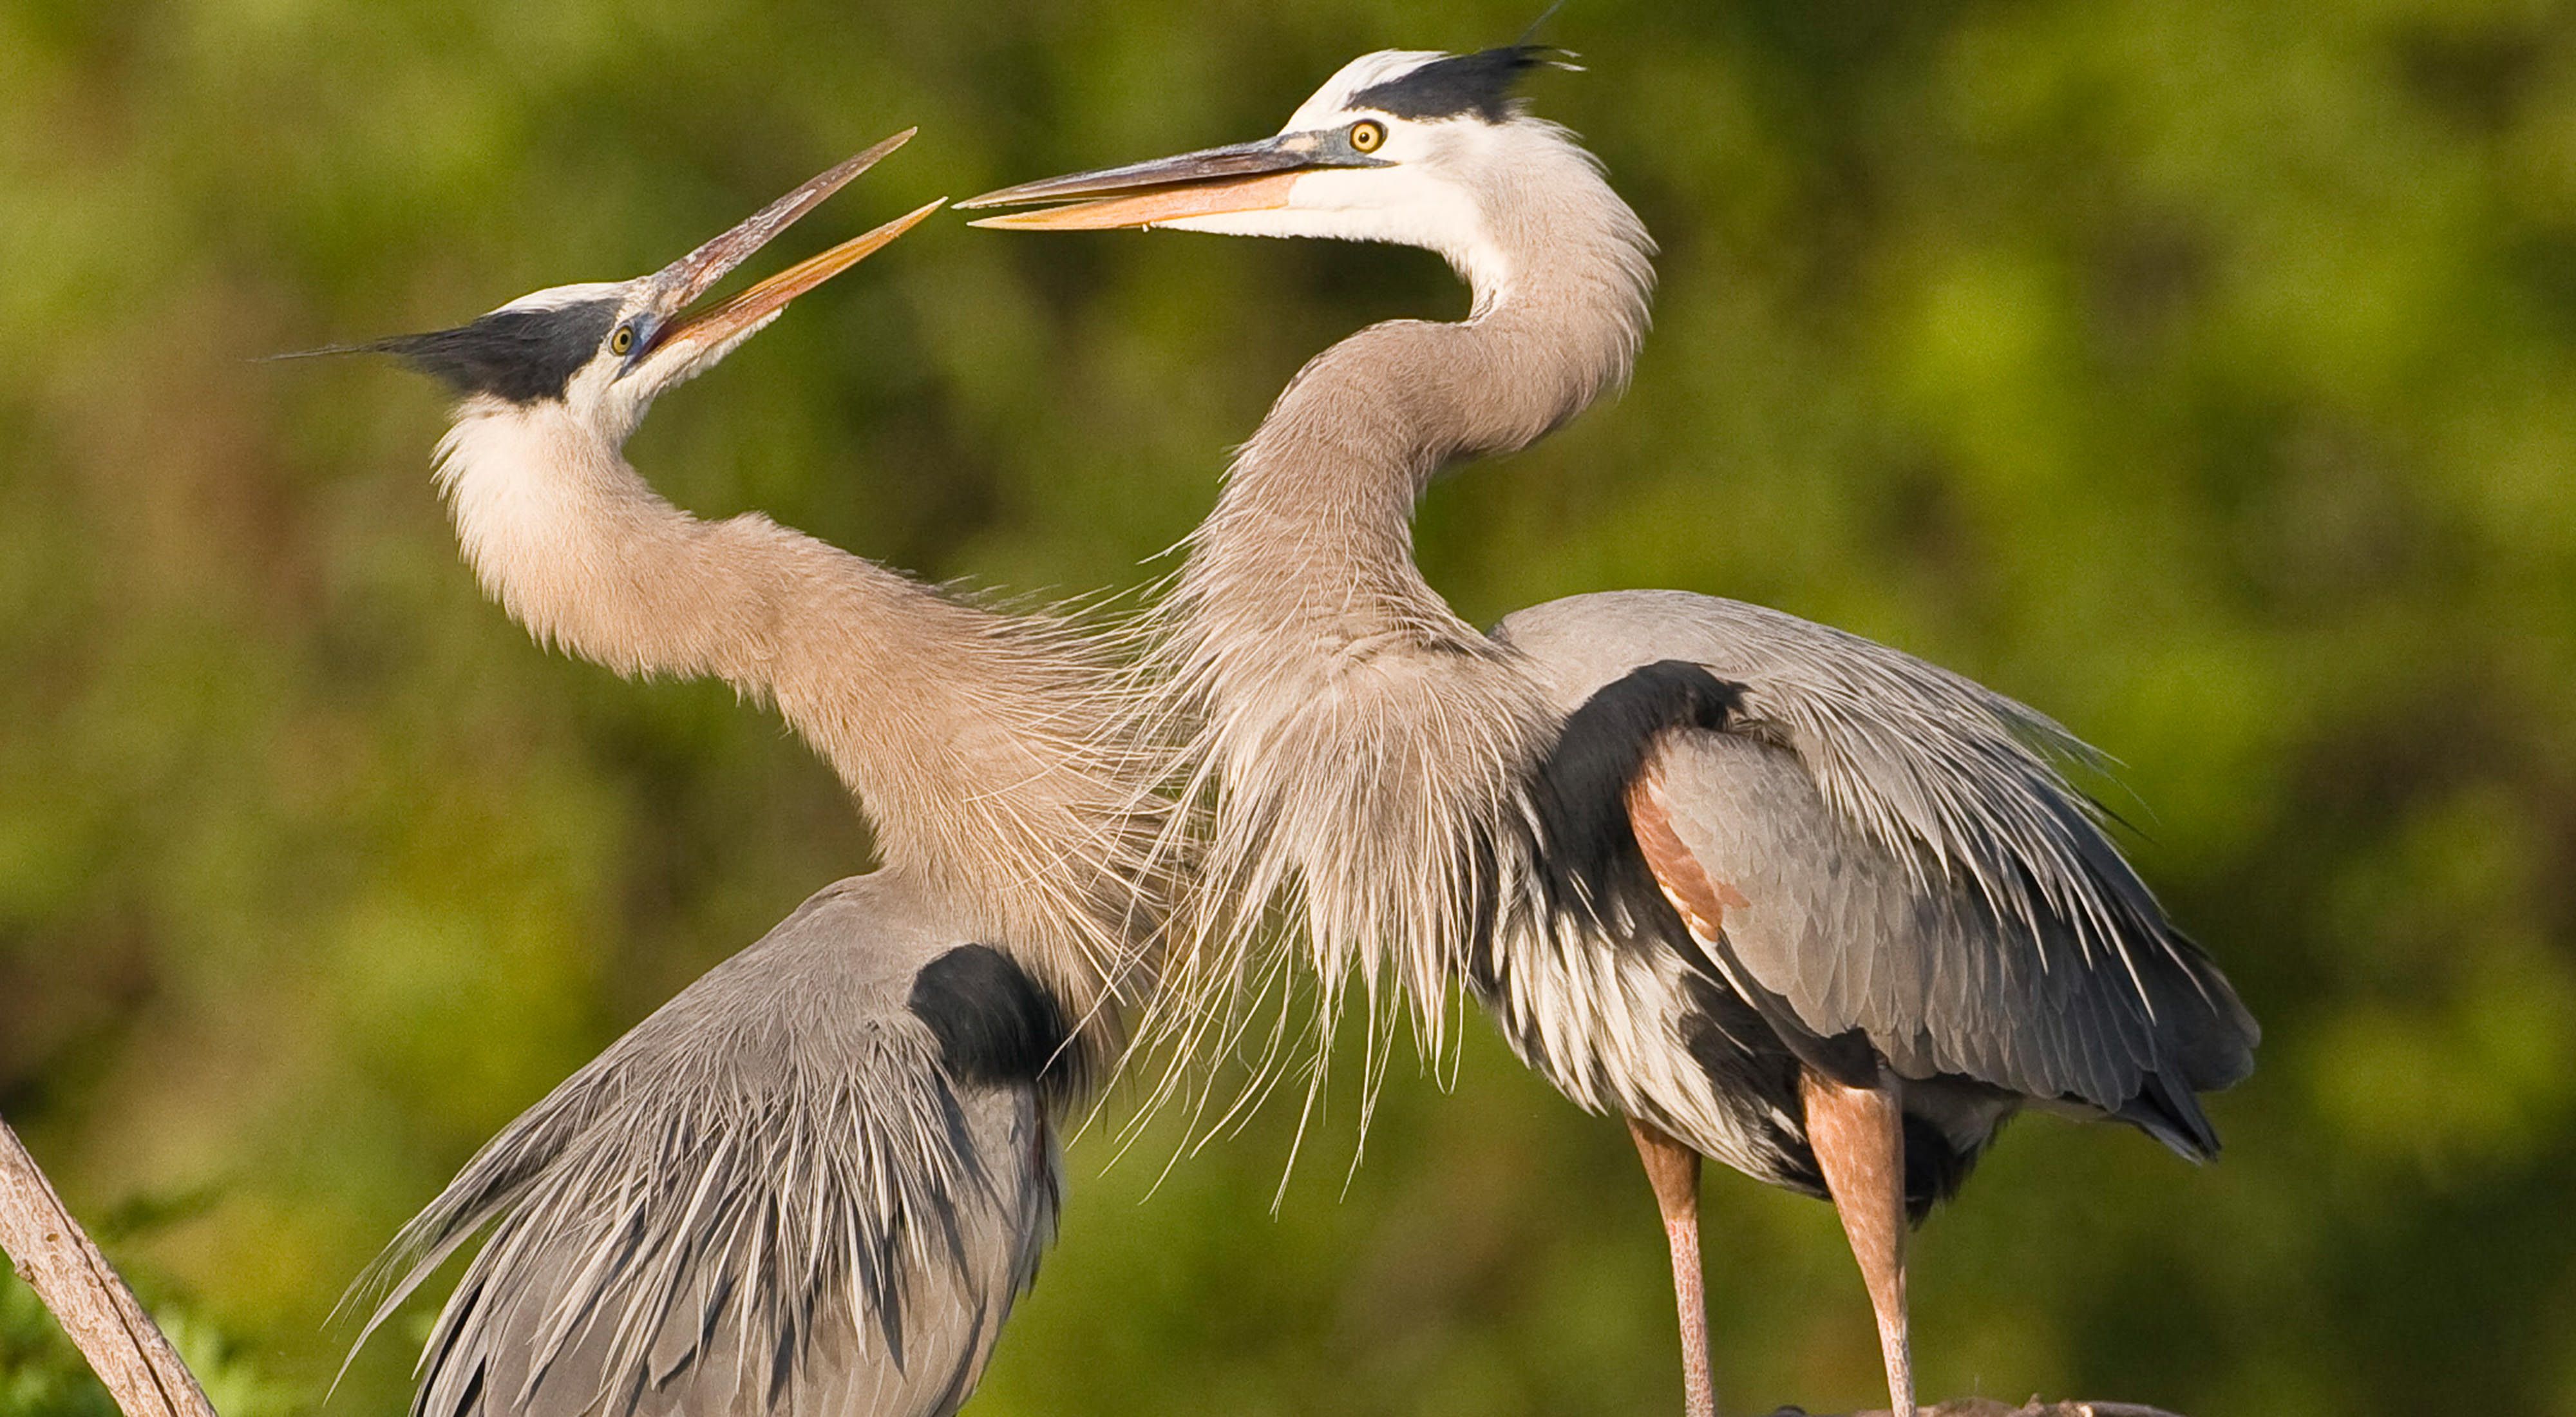 Two blue herons, large birds with thin curving necks and long pointed beaks standing facing each other.